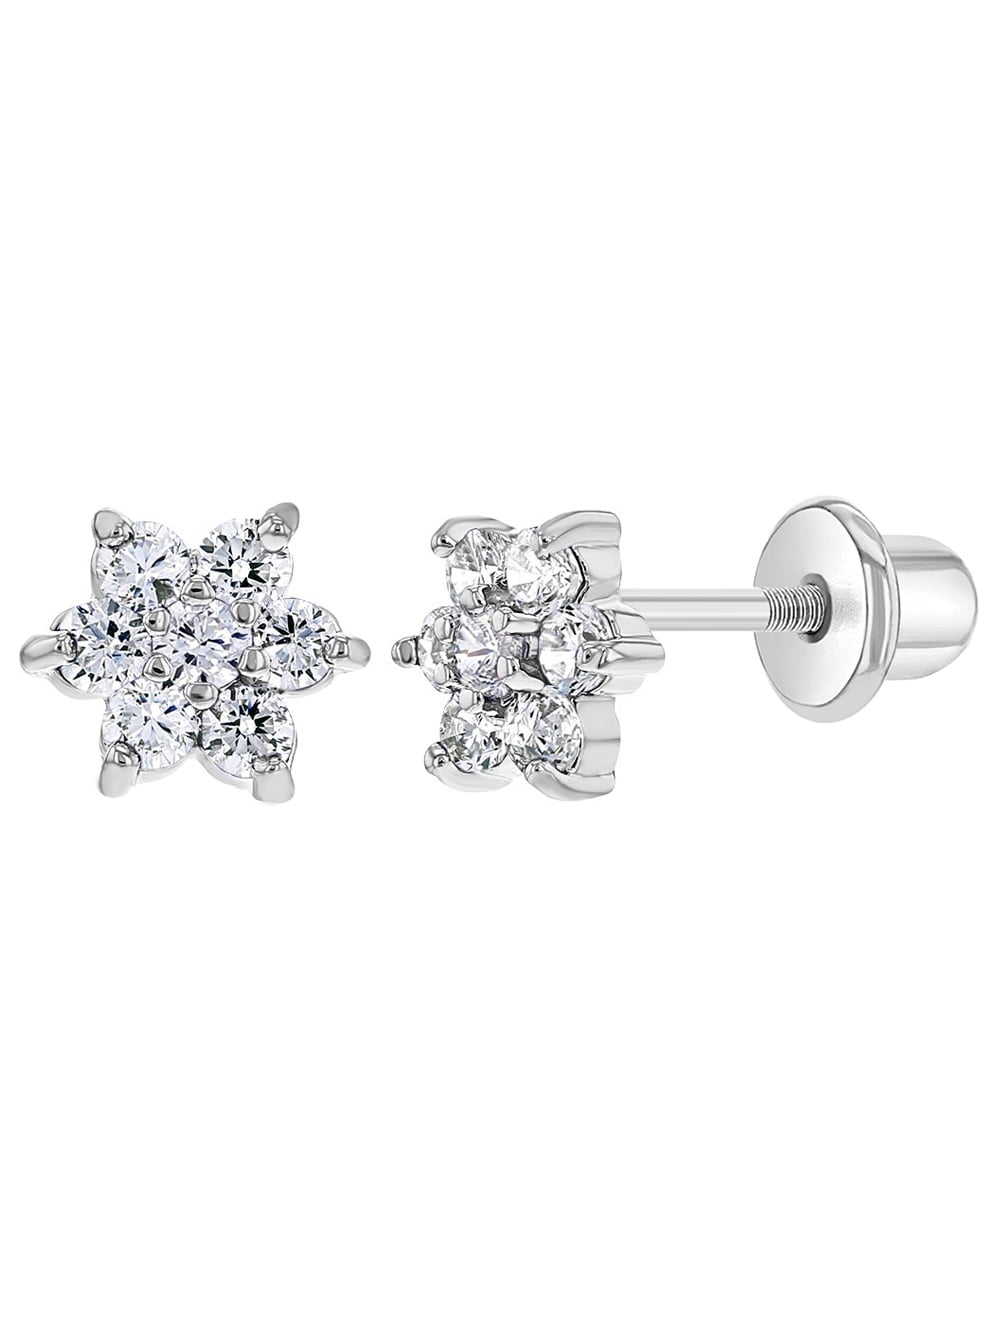 Details about   925 Sterling Silver Open Heart CZ Screw Back Earring for Baby Girl 